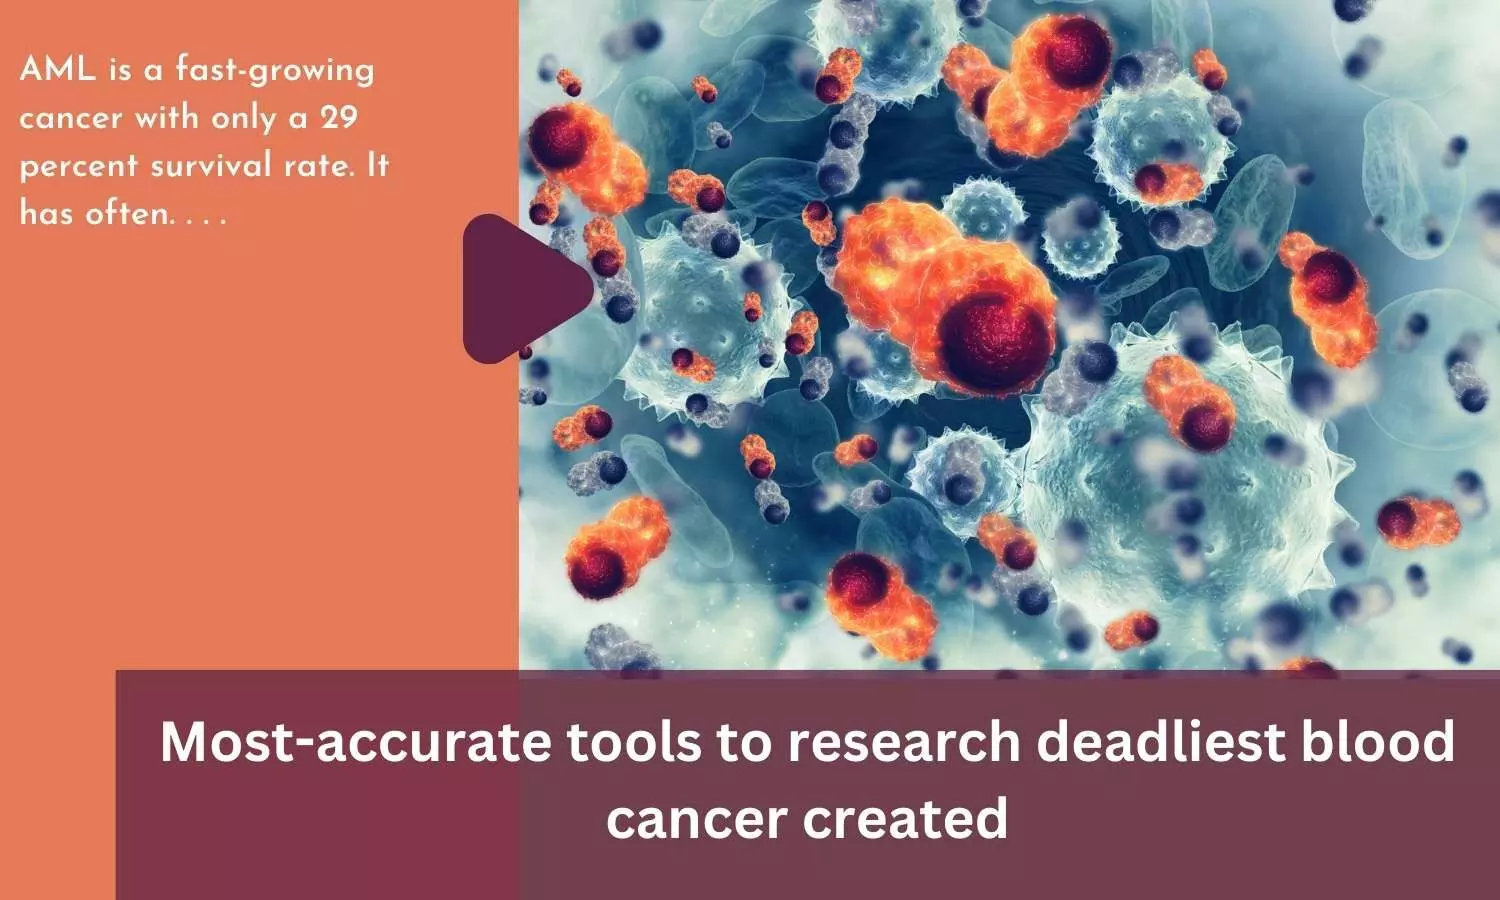 Most-accurate tools to research deadliest blood cancer created